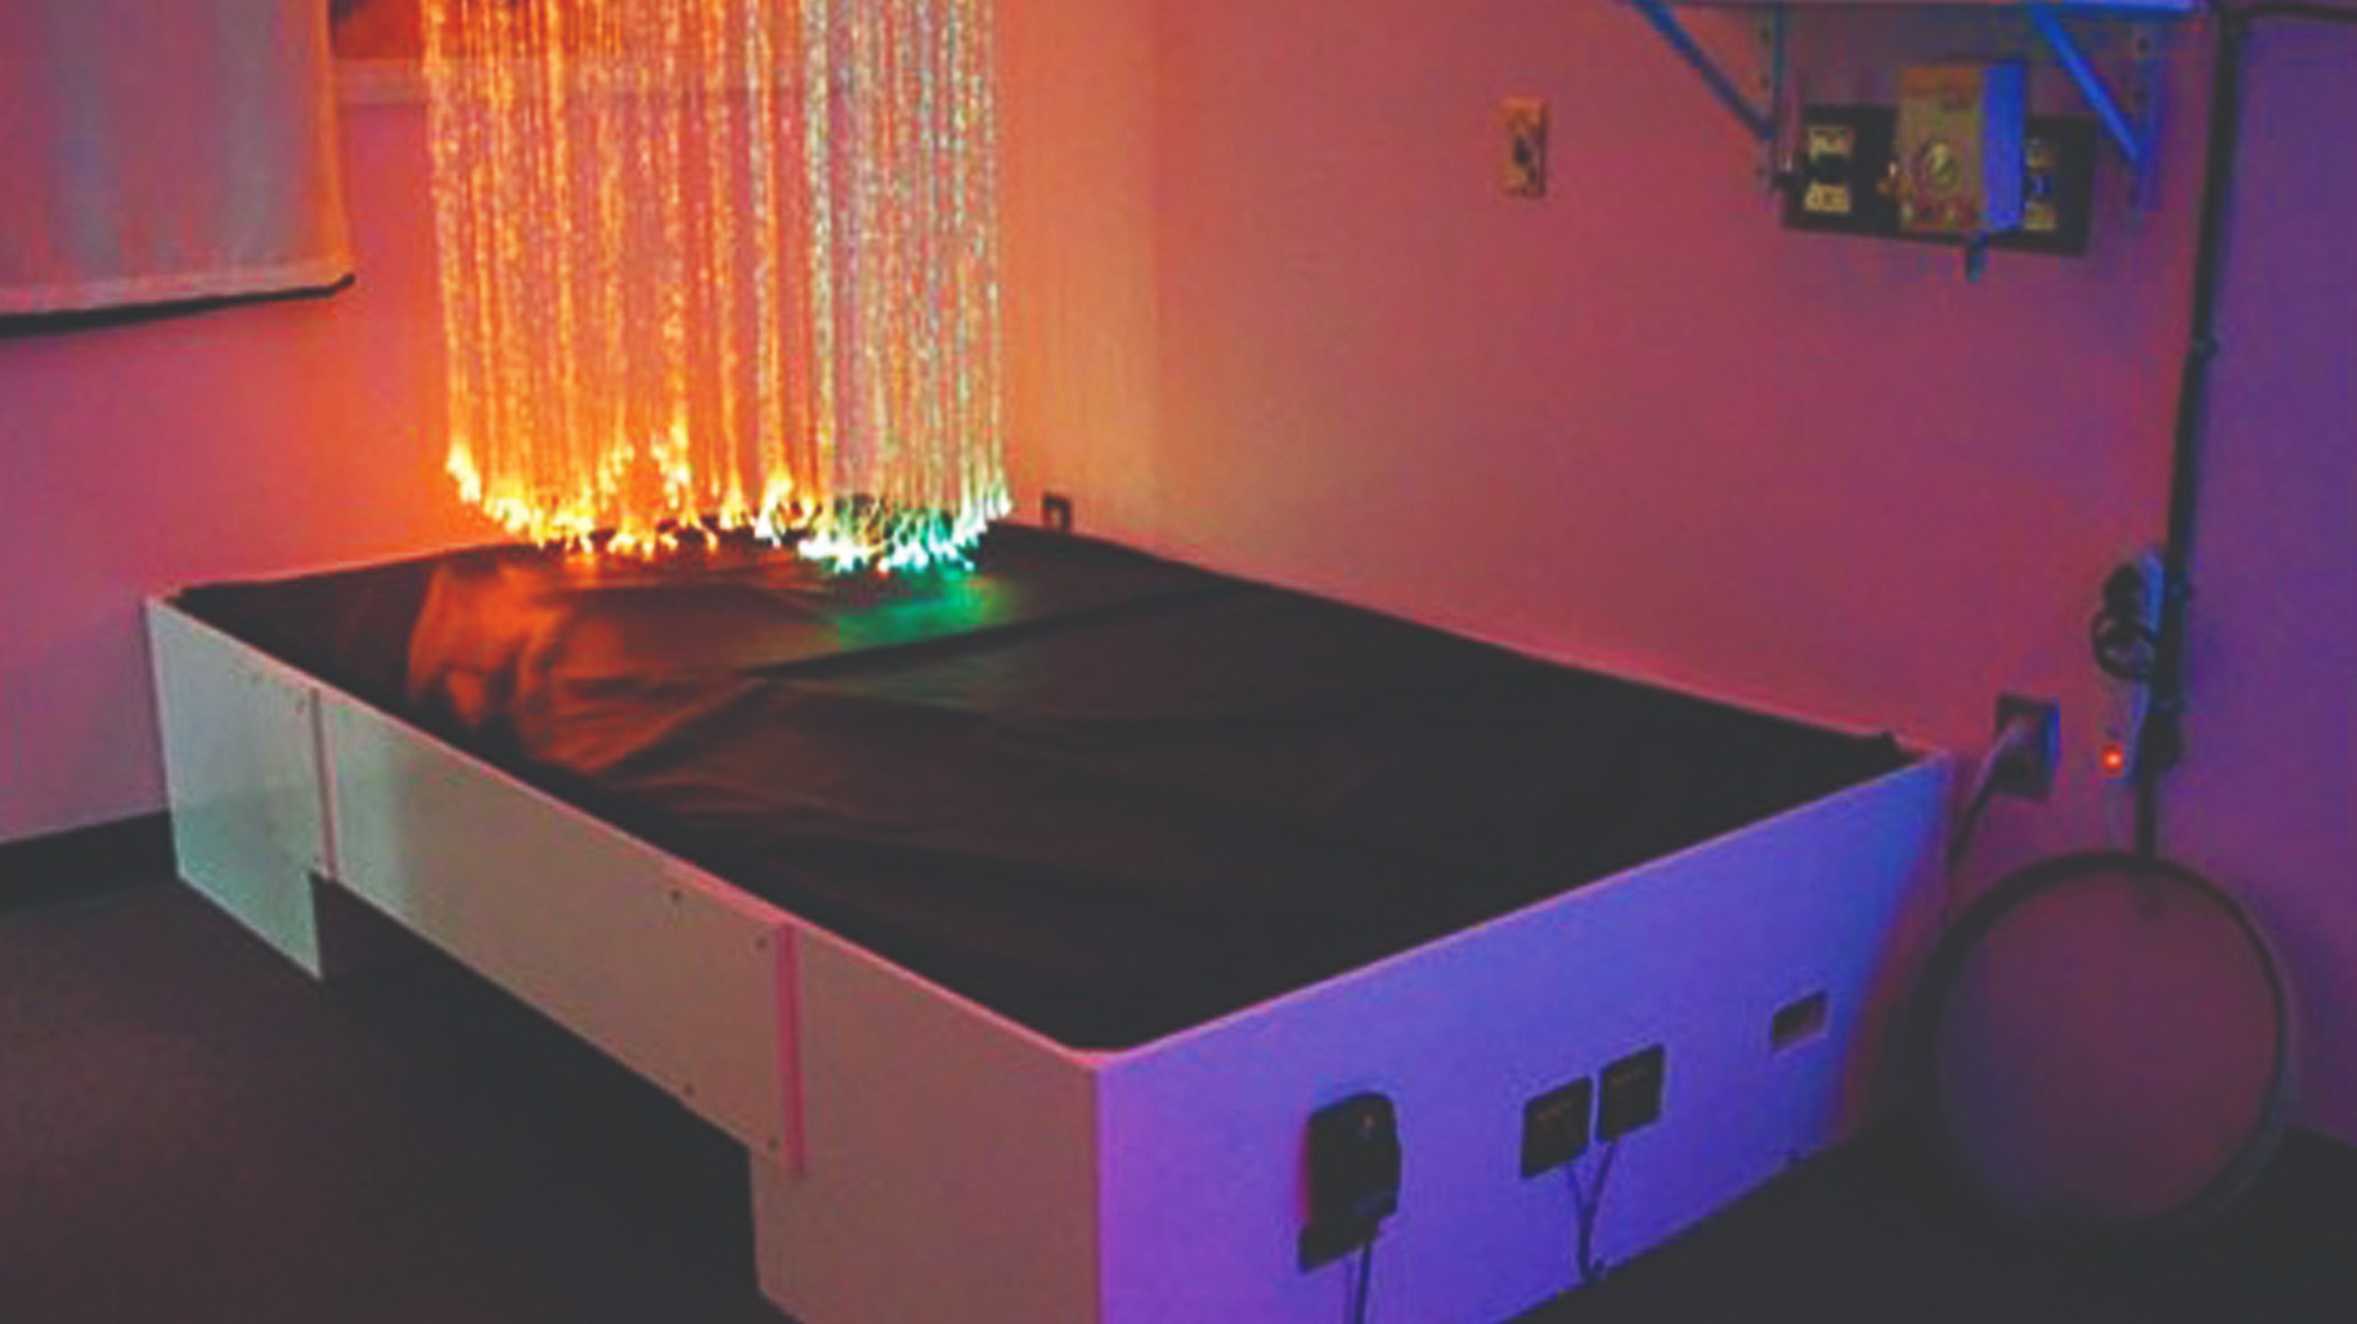 A musical waterbed provided by our partner for sensory equipment, Rhino UK.